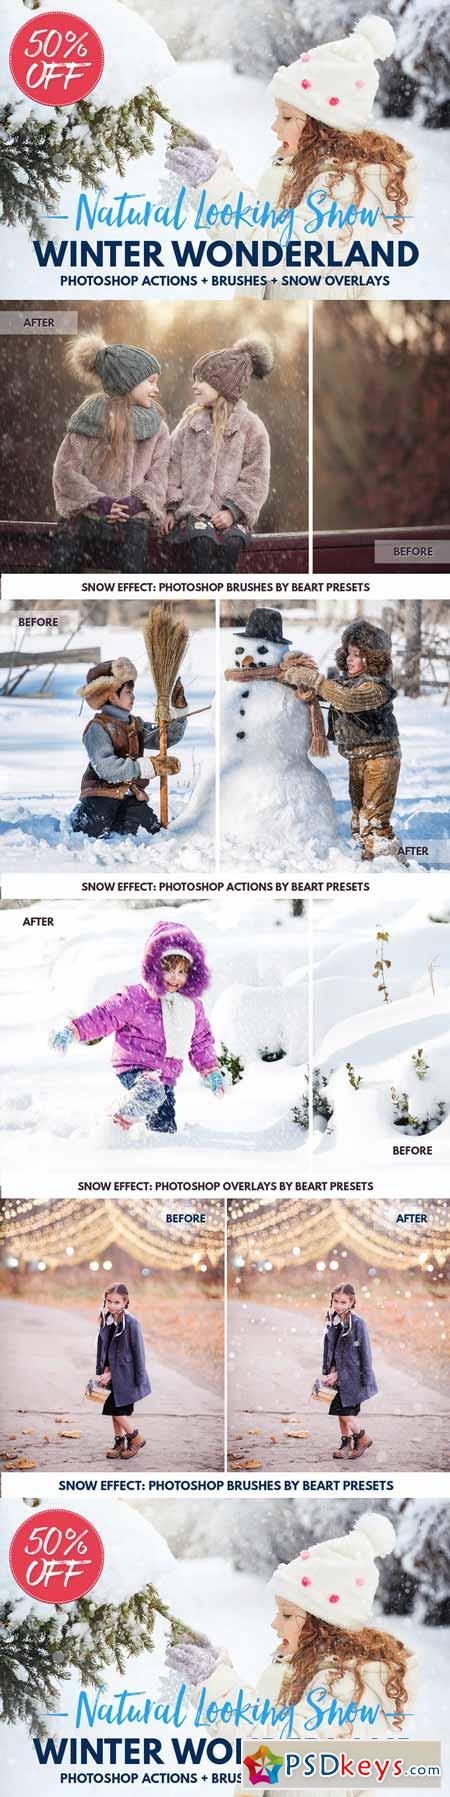 Snow Photoshop actions overlay brush 463863